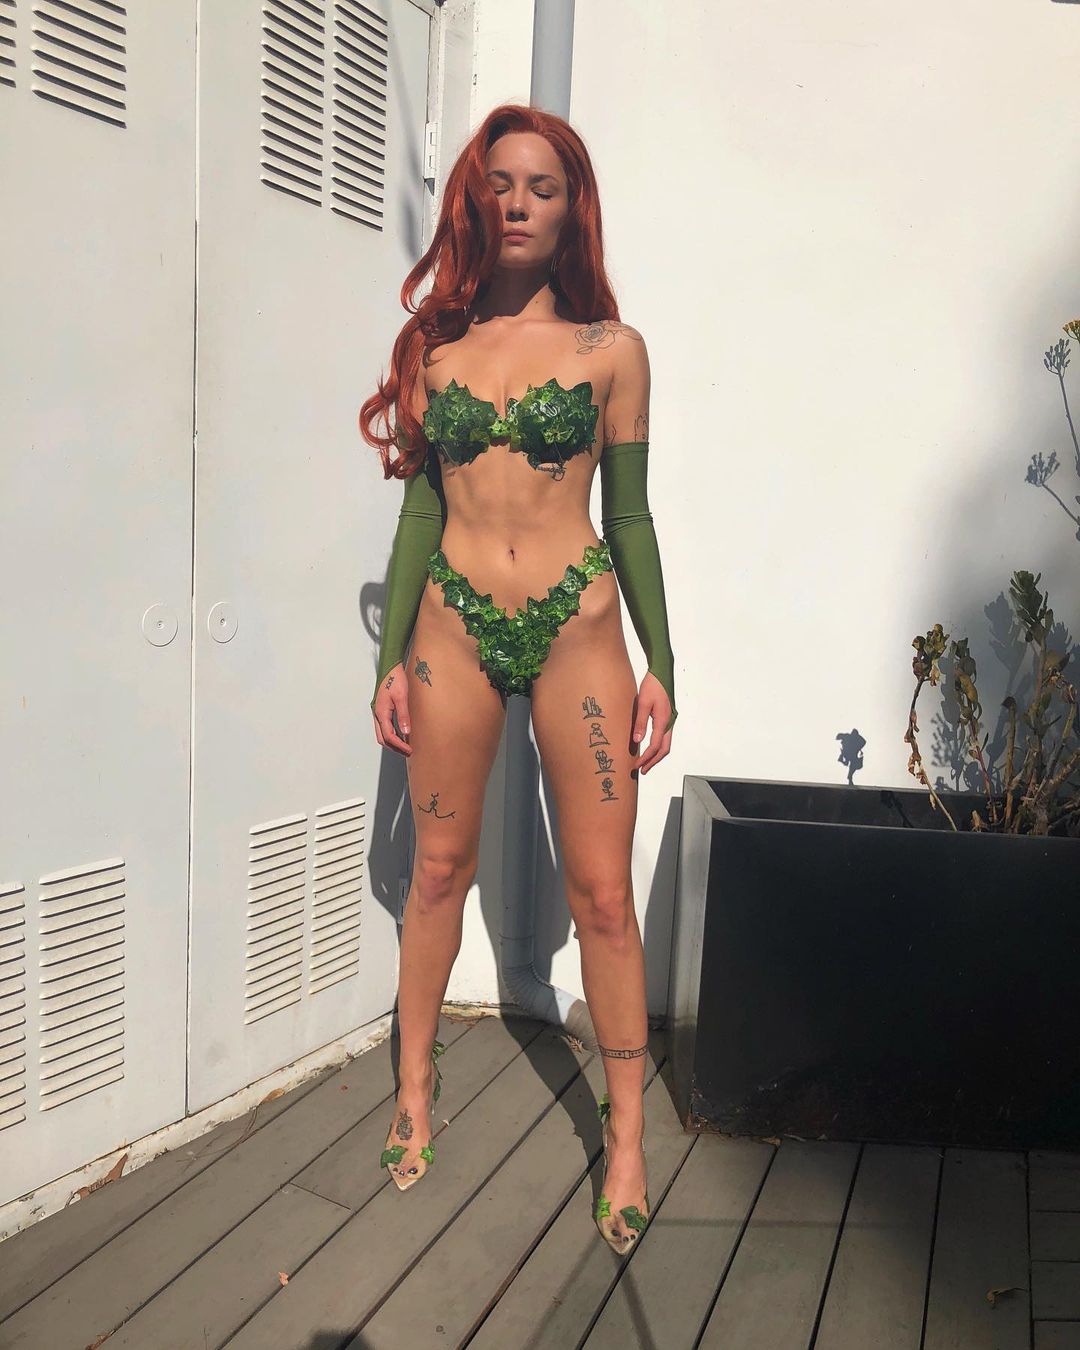 Who Did Poison Ivy Better – Bebe Rehxa or Bella Hadid?